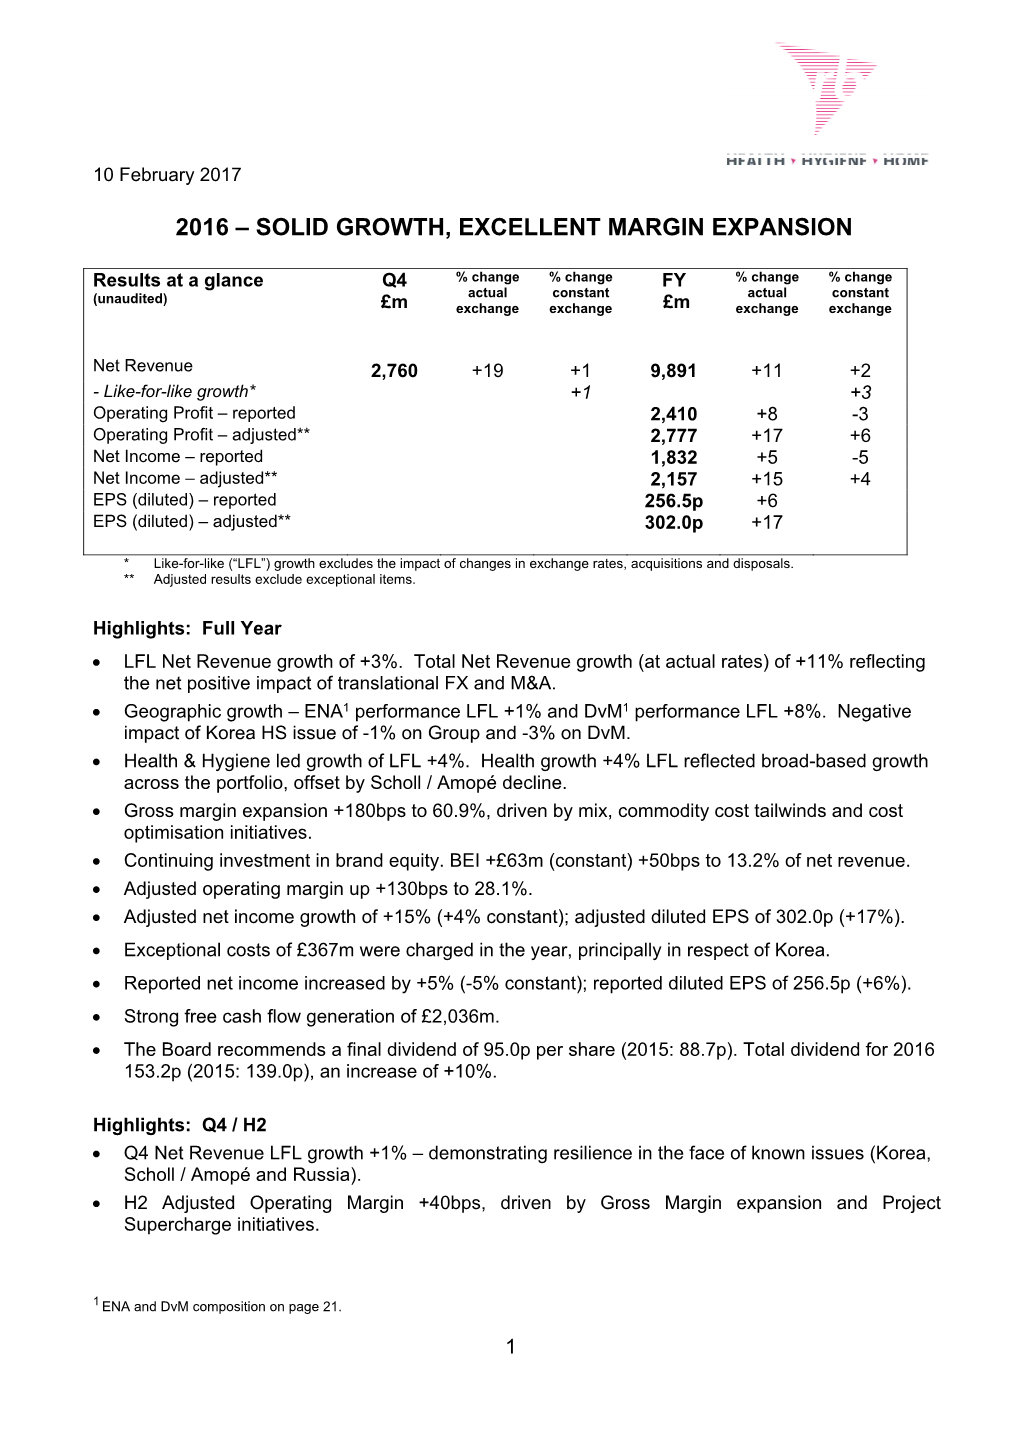 2016 – Solid Growth, Excellent Margin Expansion